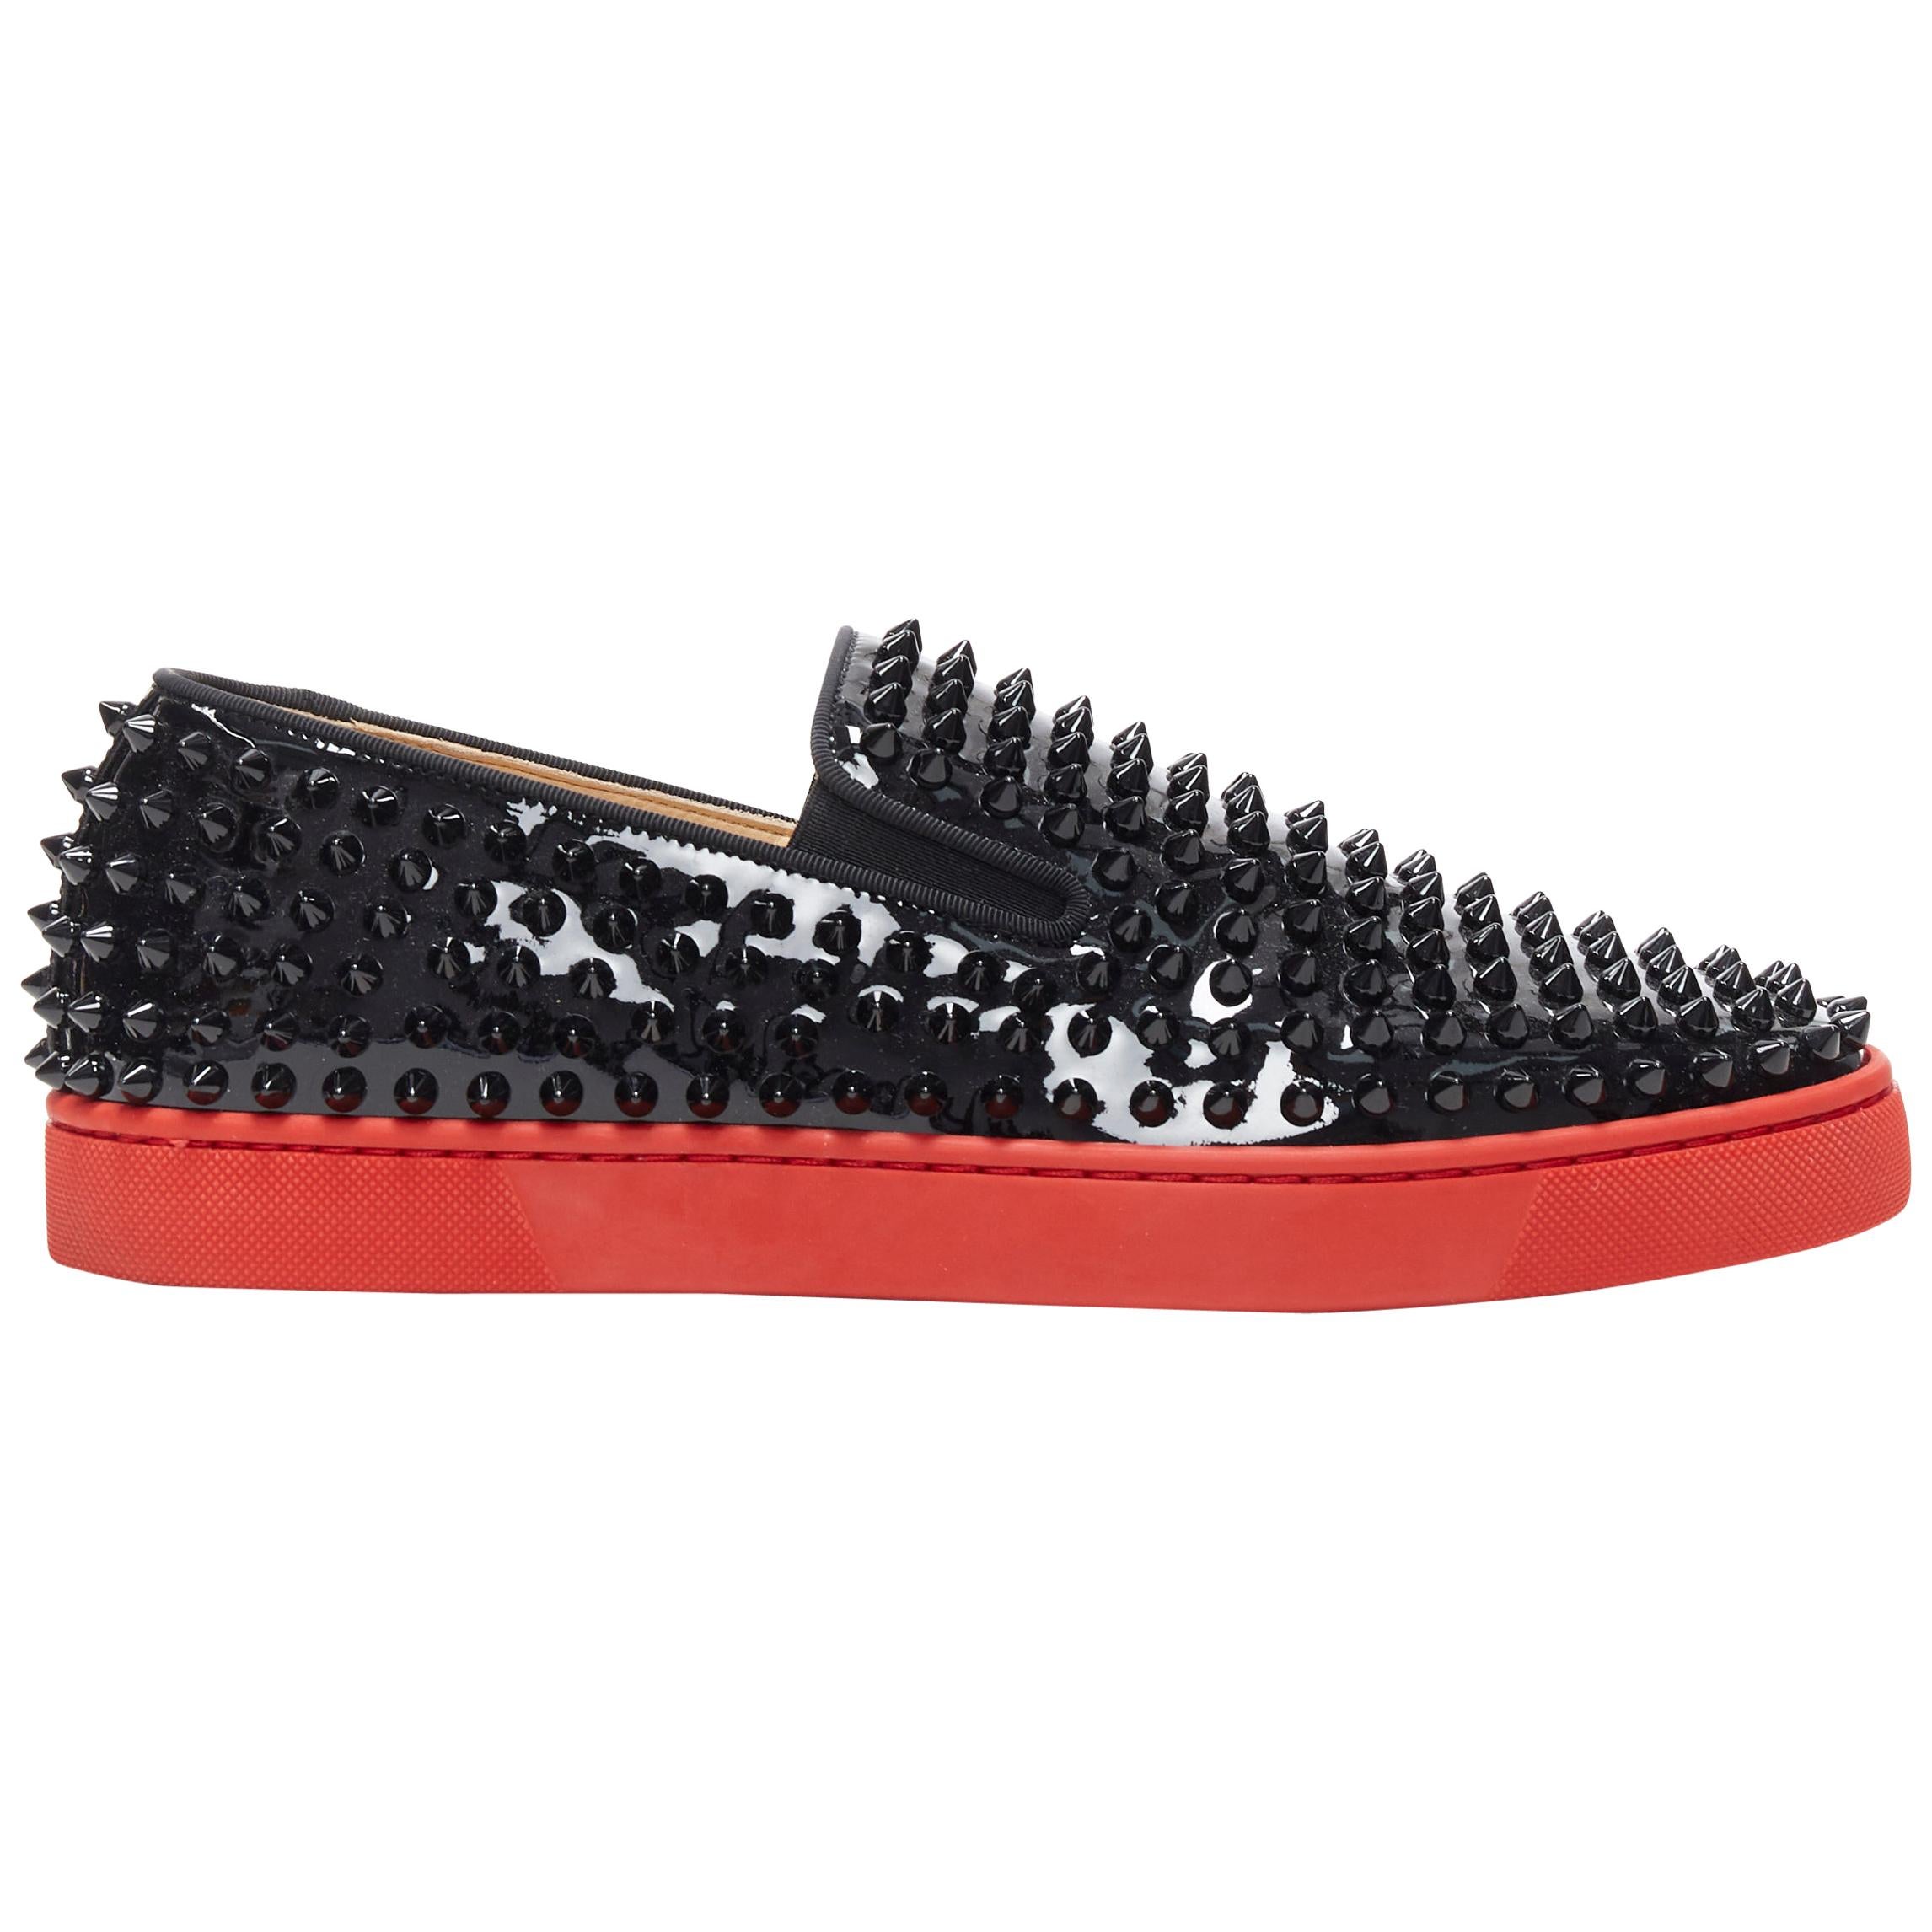 CHRISTIAN LOUBOUTIN Roller Boat black patent spike stud red